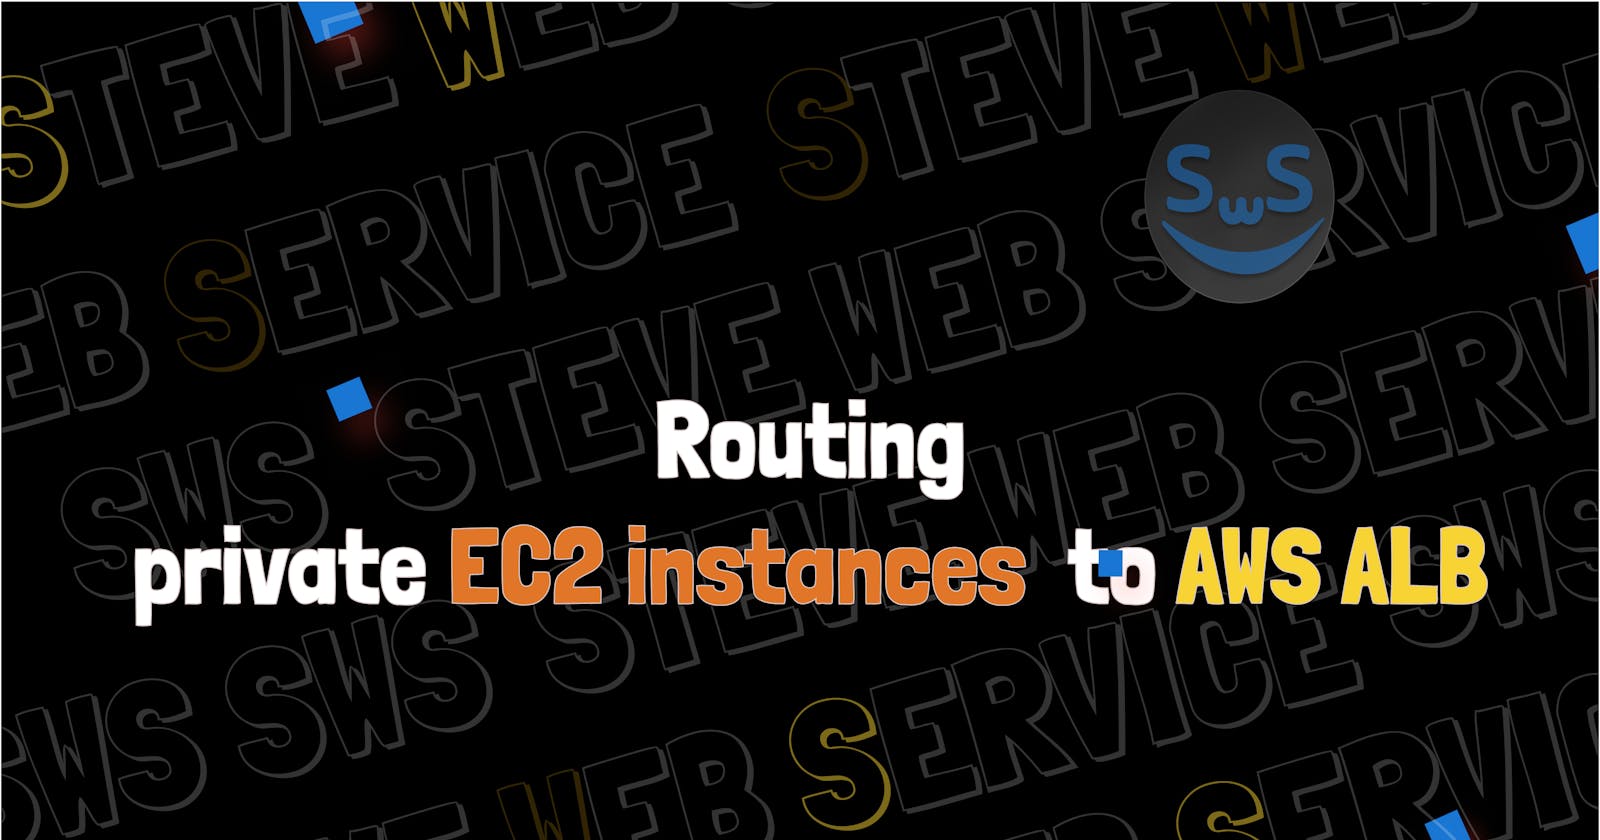 SWS Console: Routing multiple private EC2 instances to AWS ALB.